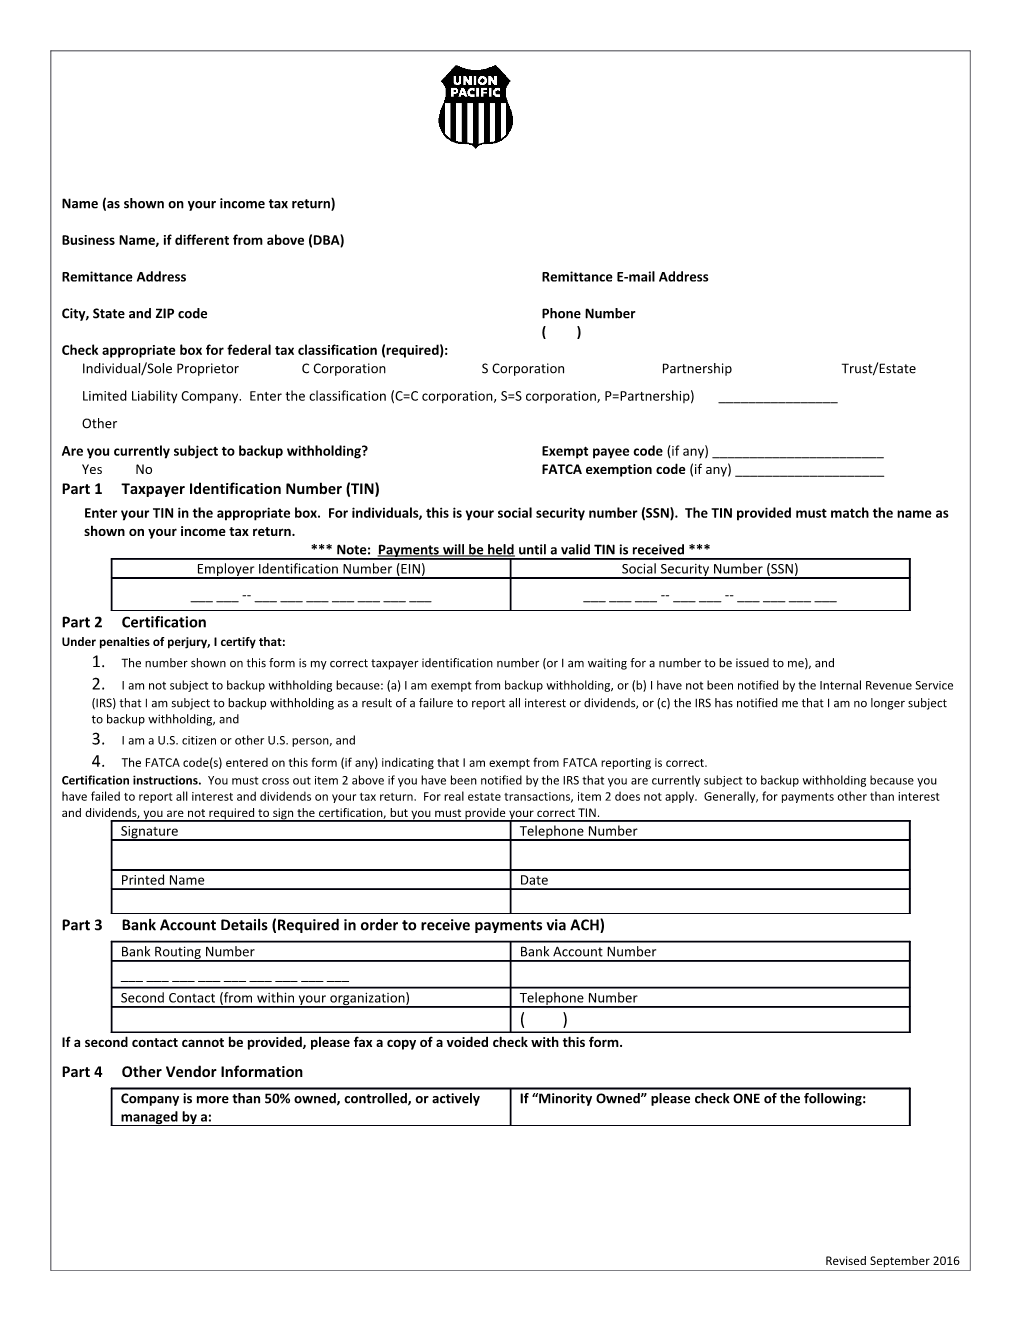 Check Appropriate Box for Federal Tax Classification (Required)